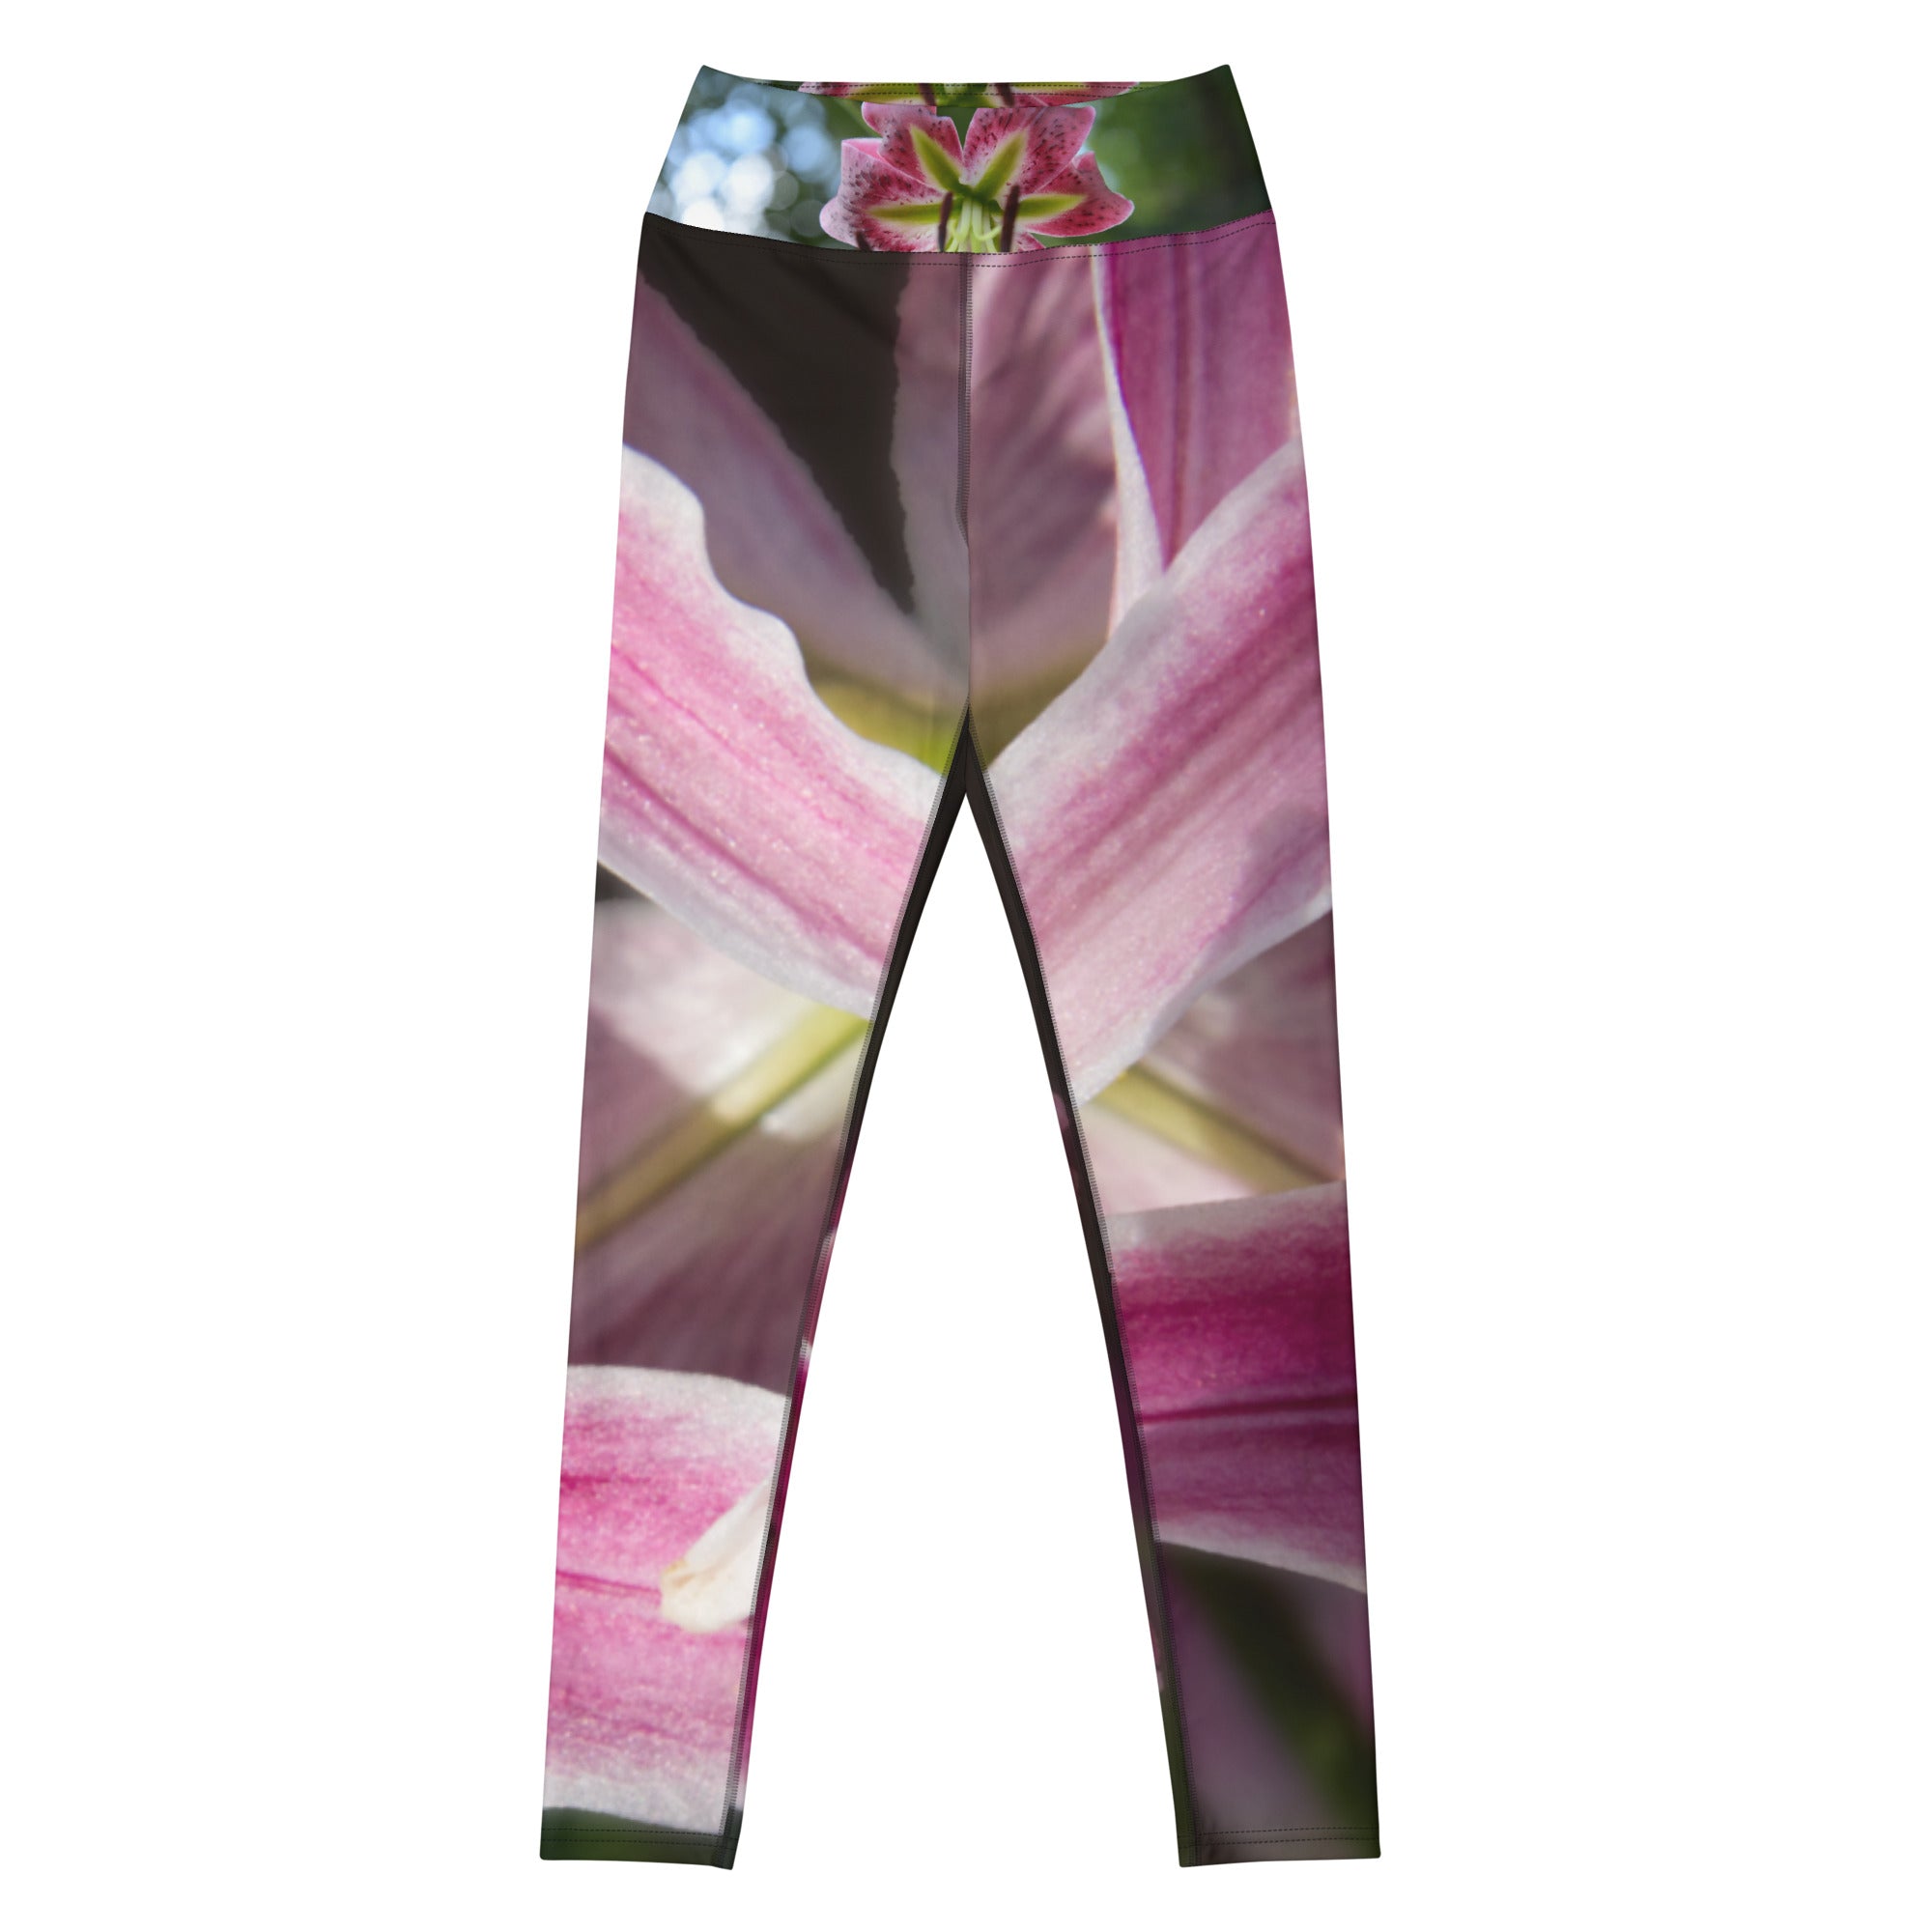 Apana Women's Pink Floral Print Yoga Lifestyle Extended Waistband